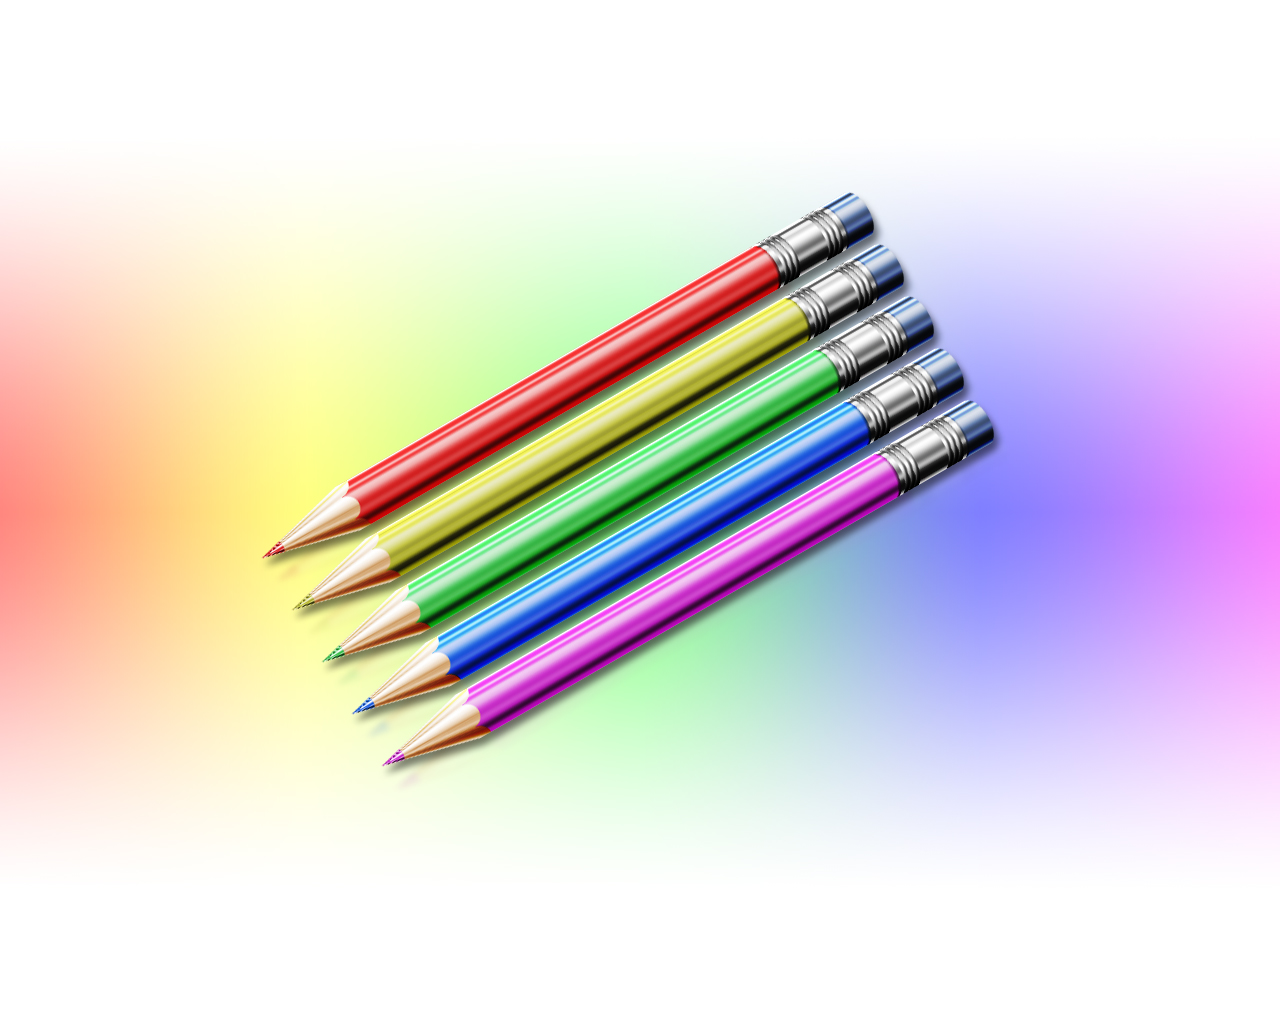 Colored Pencils Wallpaper By Mauxwebmaster